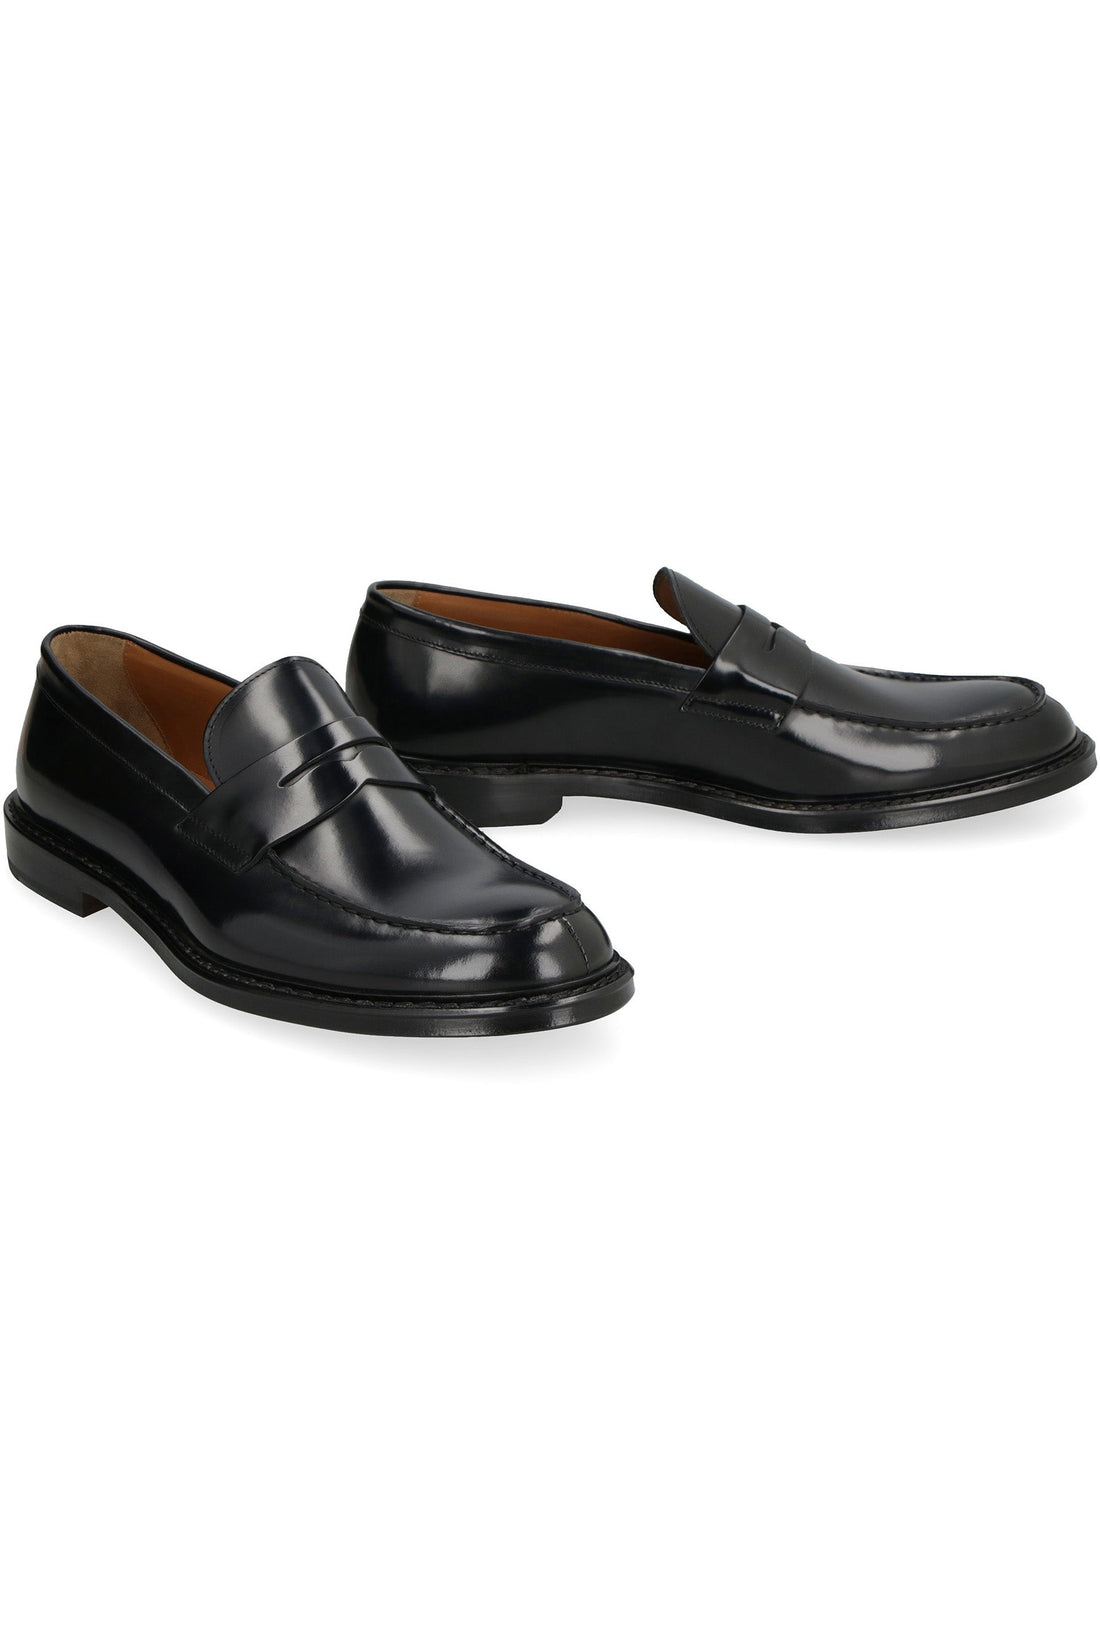 Doucal's-OUTLET-SALE-Brushed leather loafers-ARCHIVIST